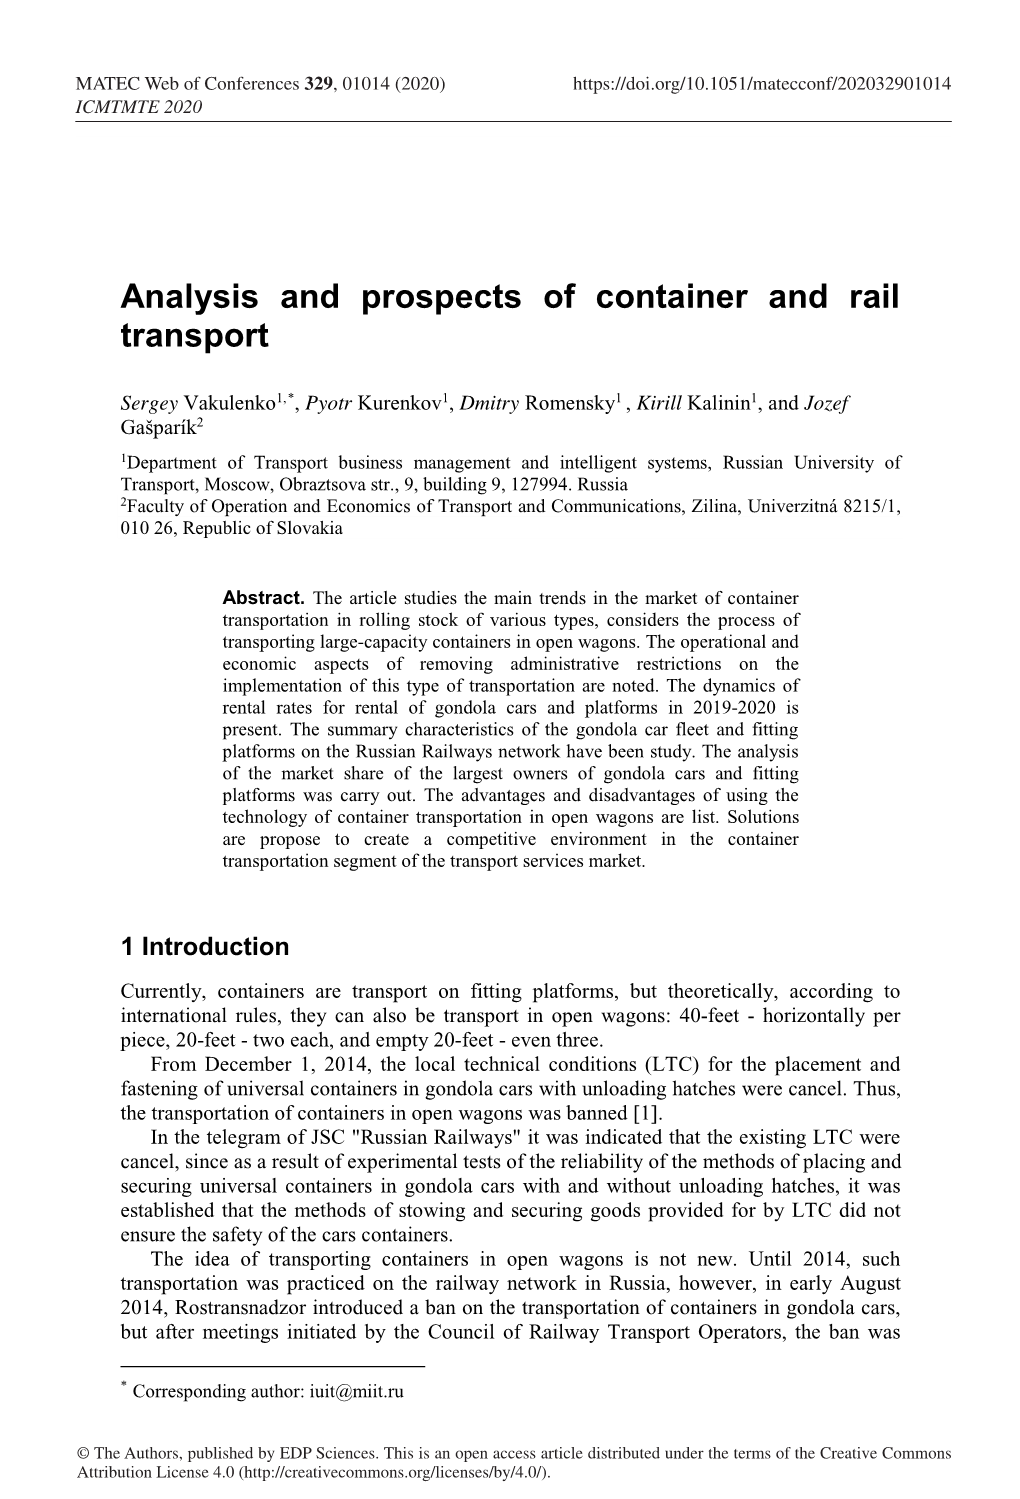 Analysis and Prospects of Container and Rail Transport